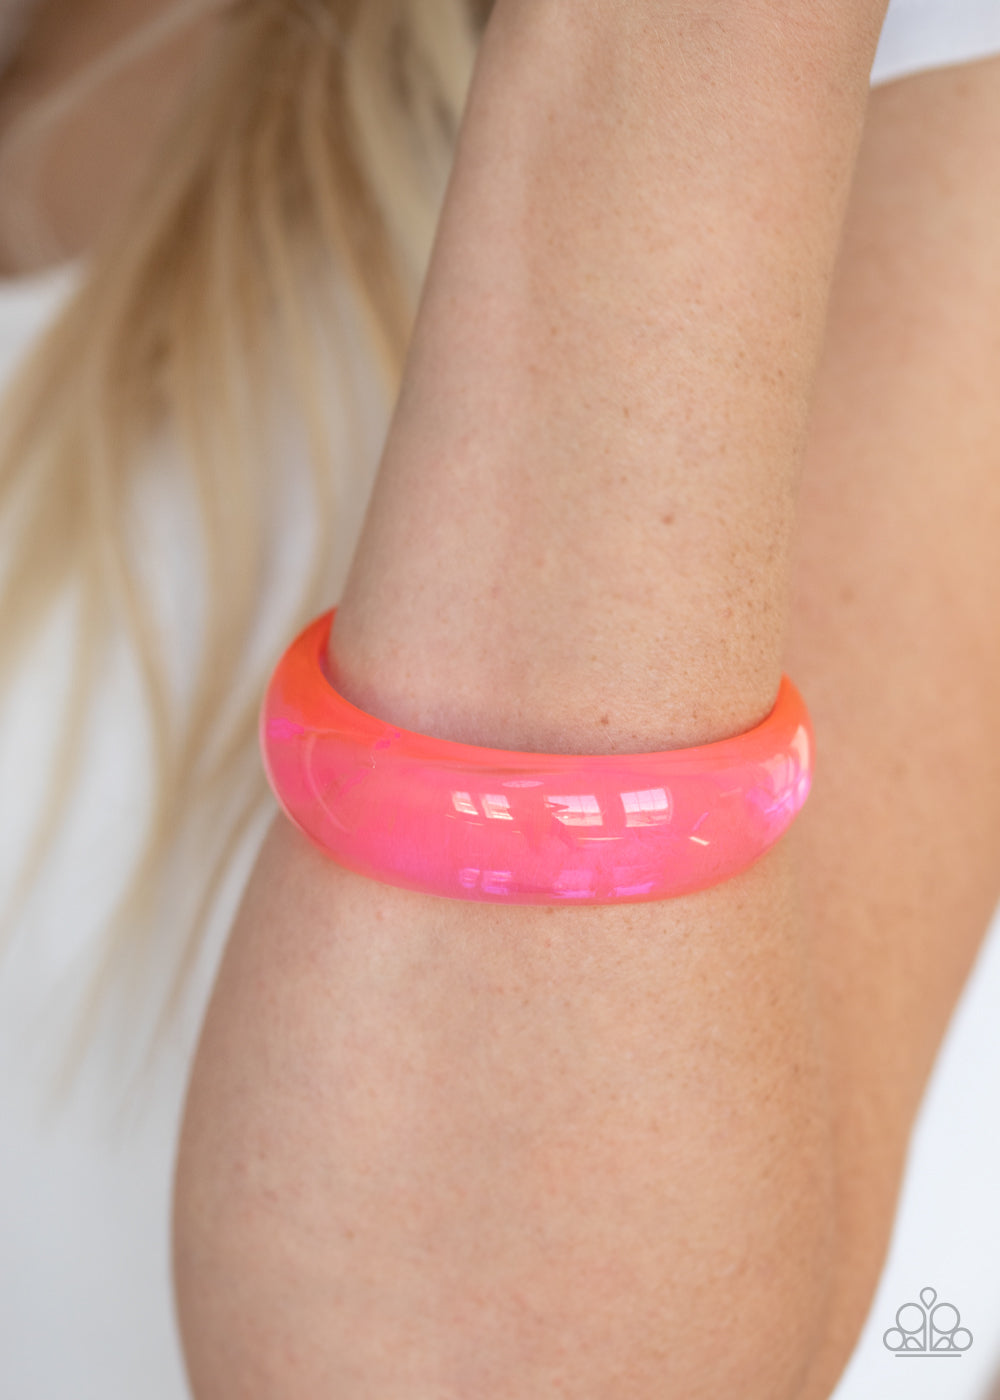 Paparazzi  - Major Material Girl - Pink Bracelet - Paparazzi Accessories - A neon pink acrylic bangle slides along the wrist for a colorfully retro flair. The shiny bangle gradually widens at the top for a fabulous finish.